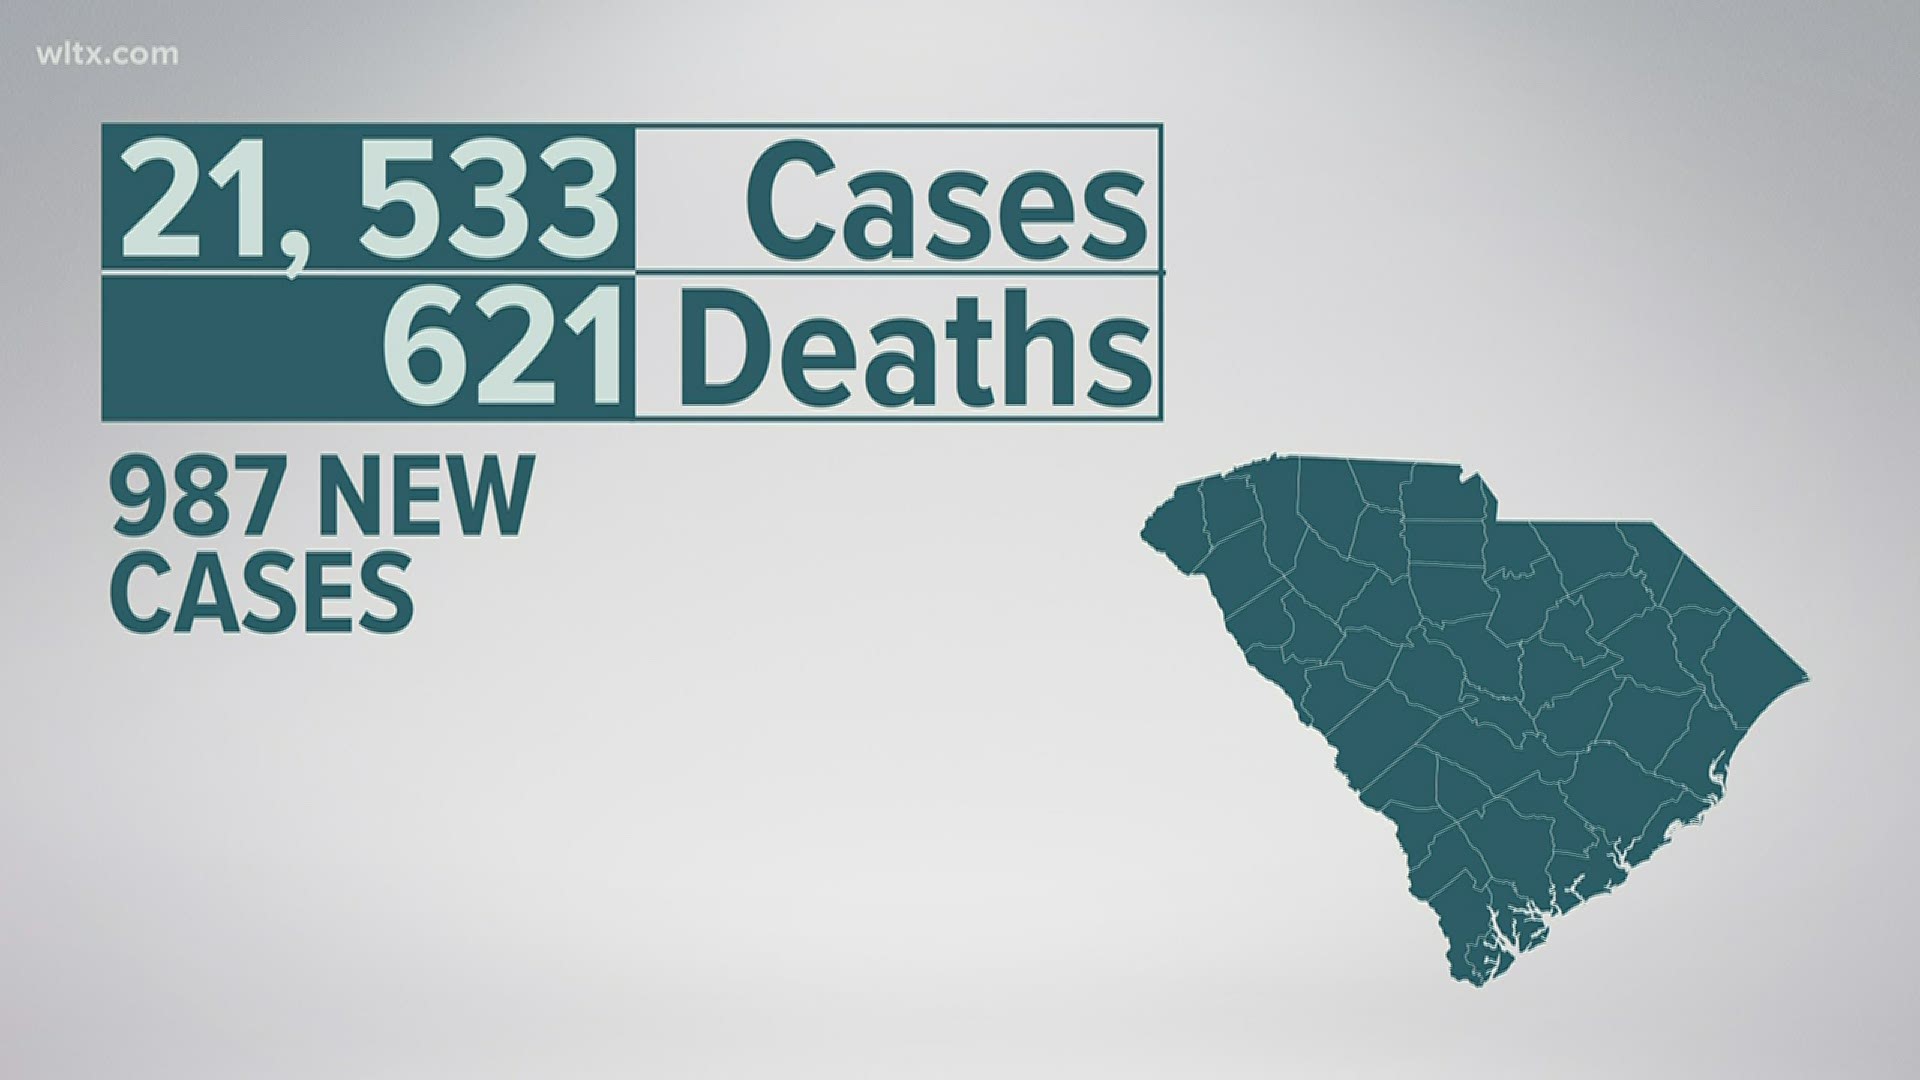 This brings the total number of confirmed cases to 21,533, probable cases to 15, confirmed deaths to 621, and zero probable death